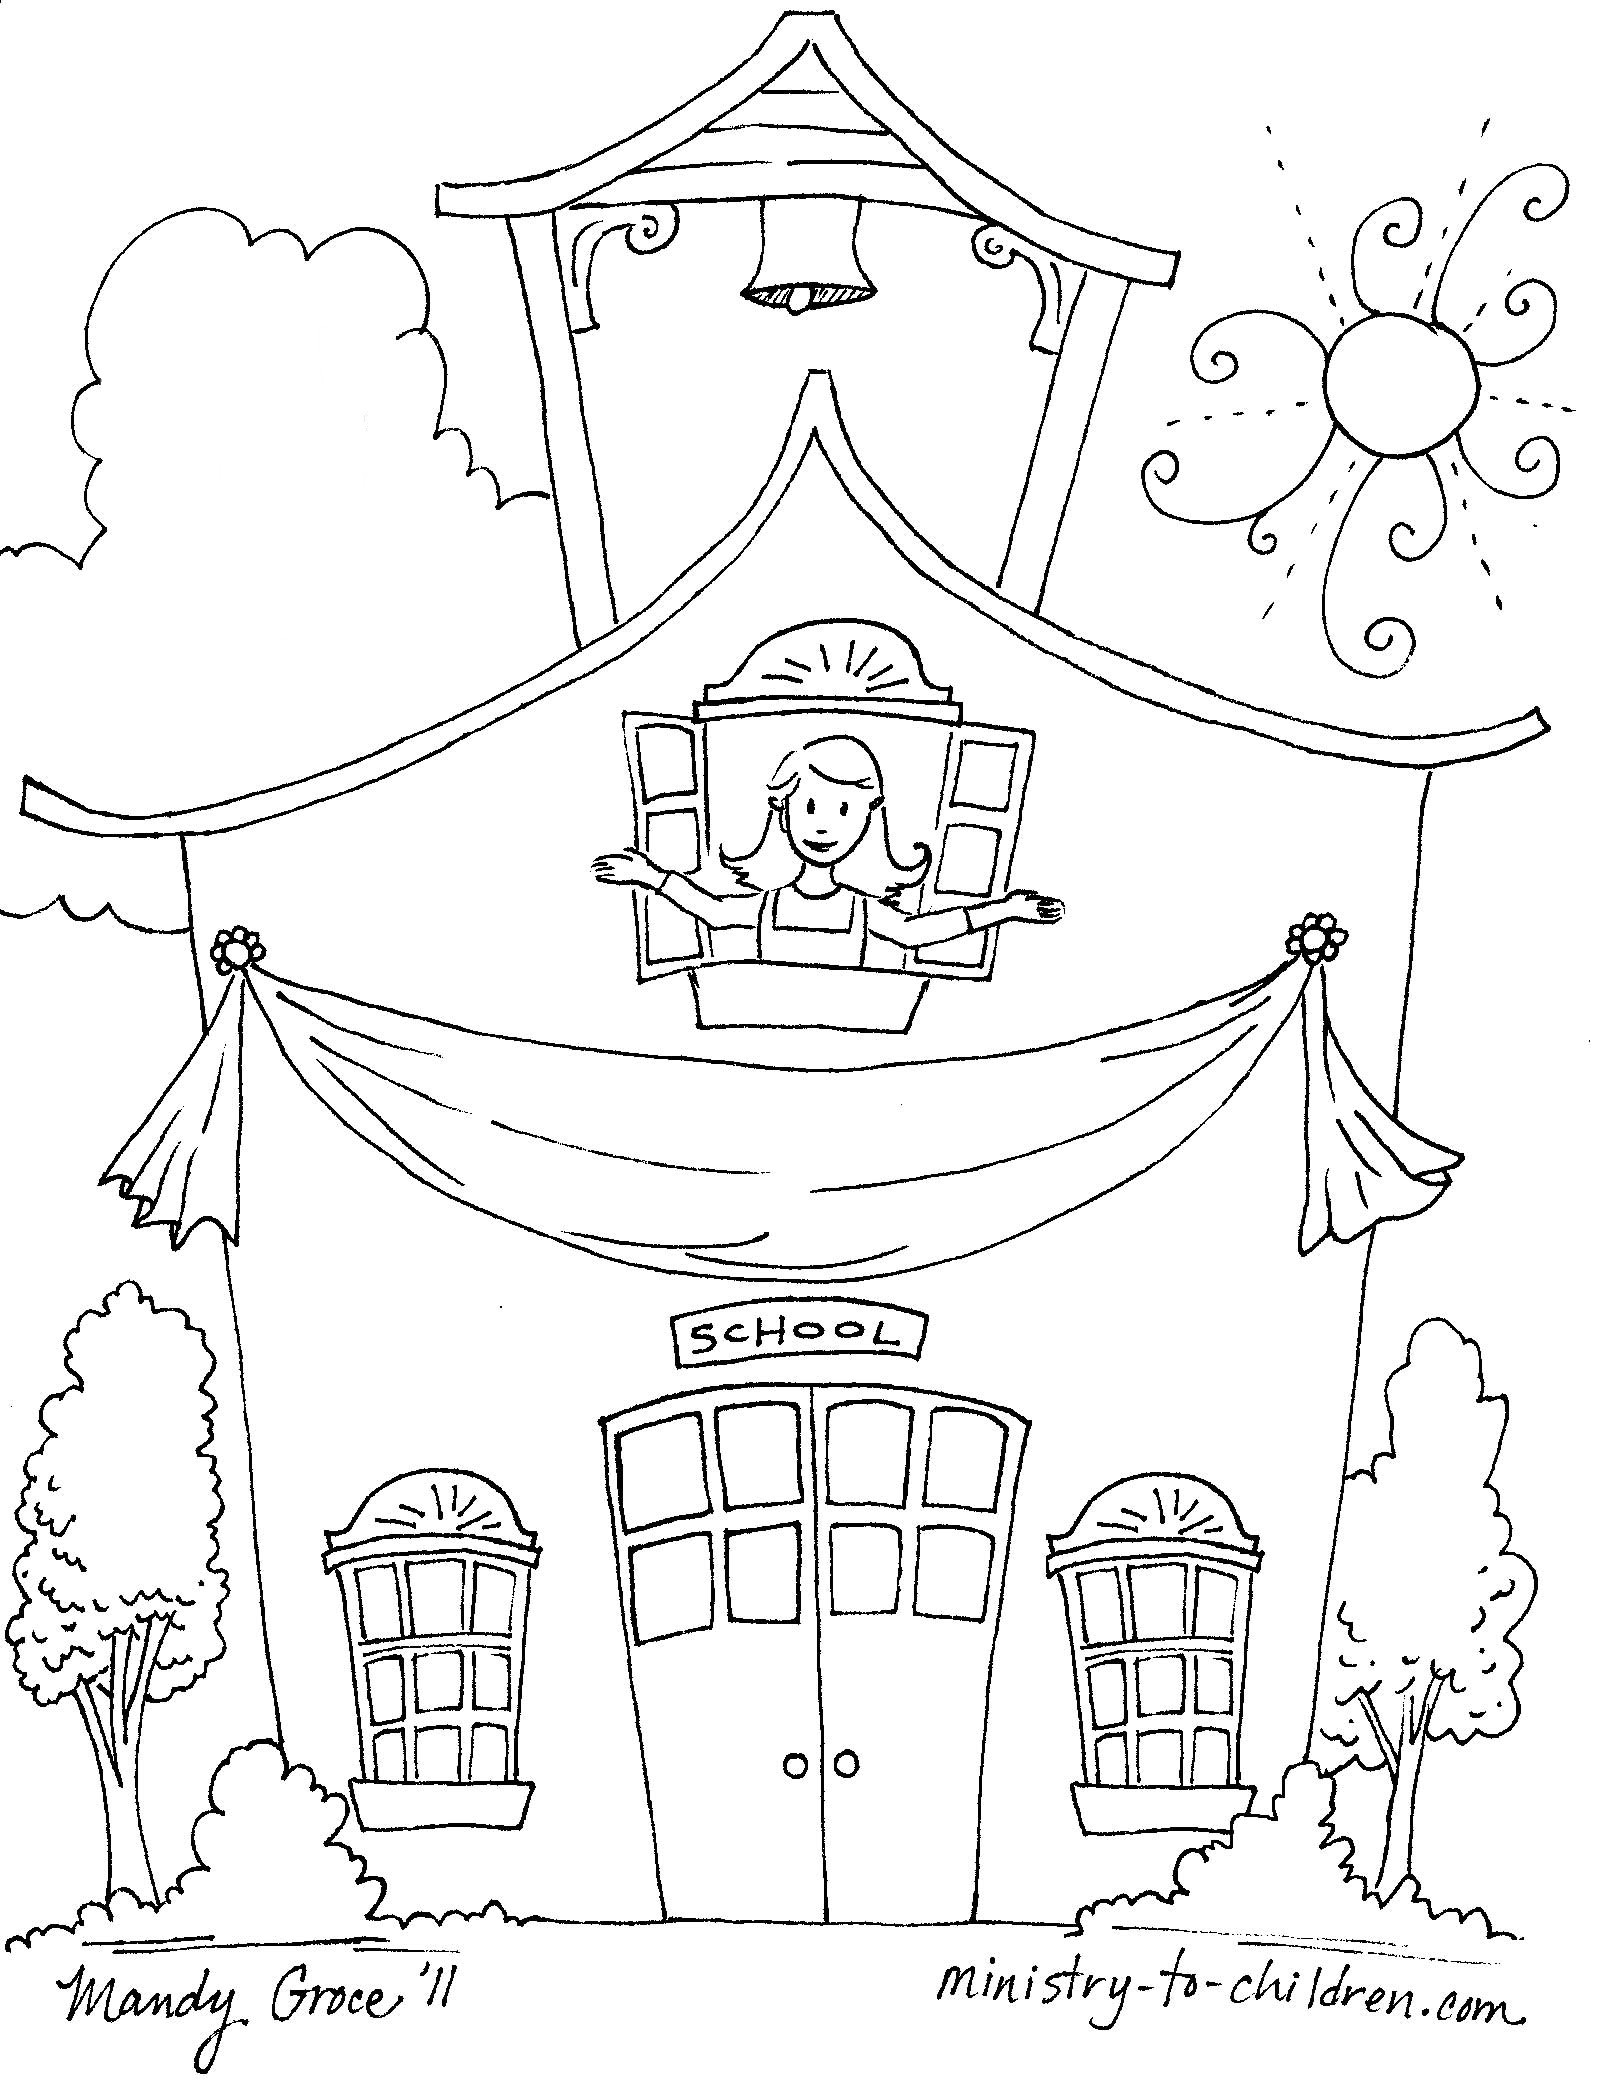 Coloring page: School (Buildings and Architecture) #64001 - Free Printable Coloring Pages